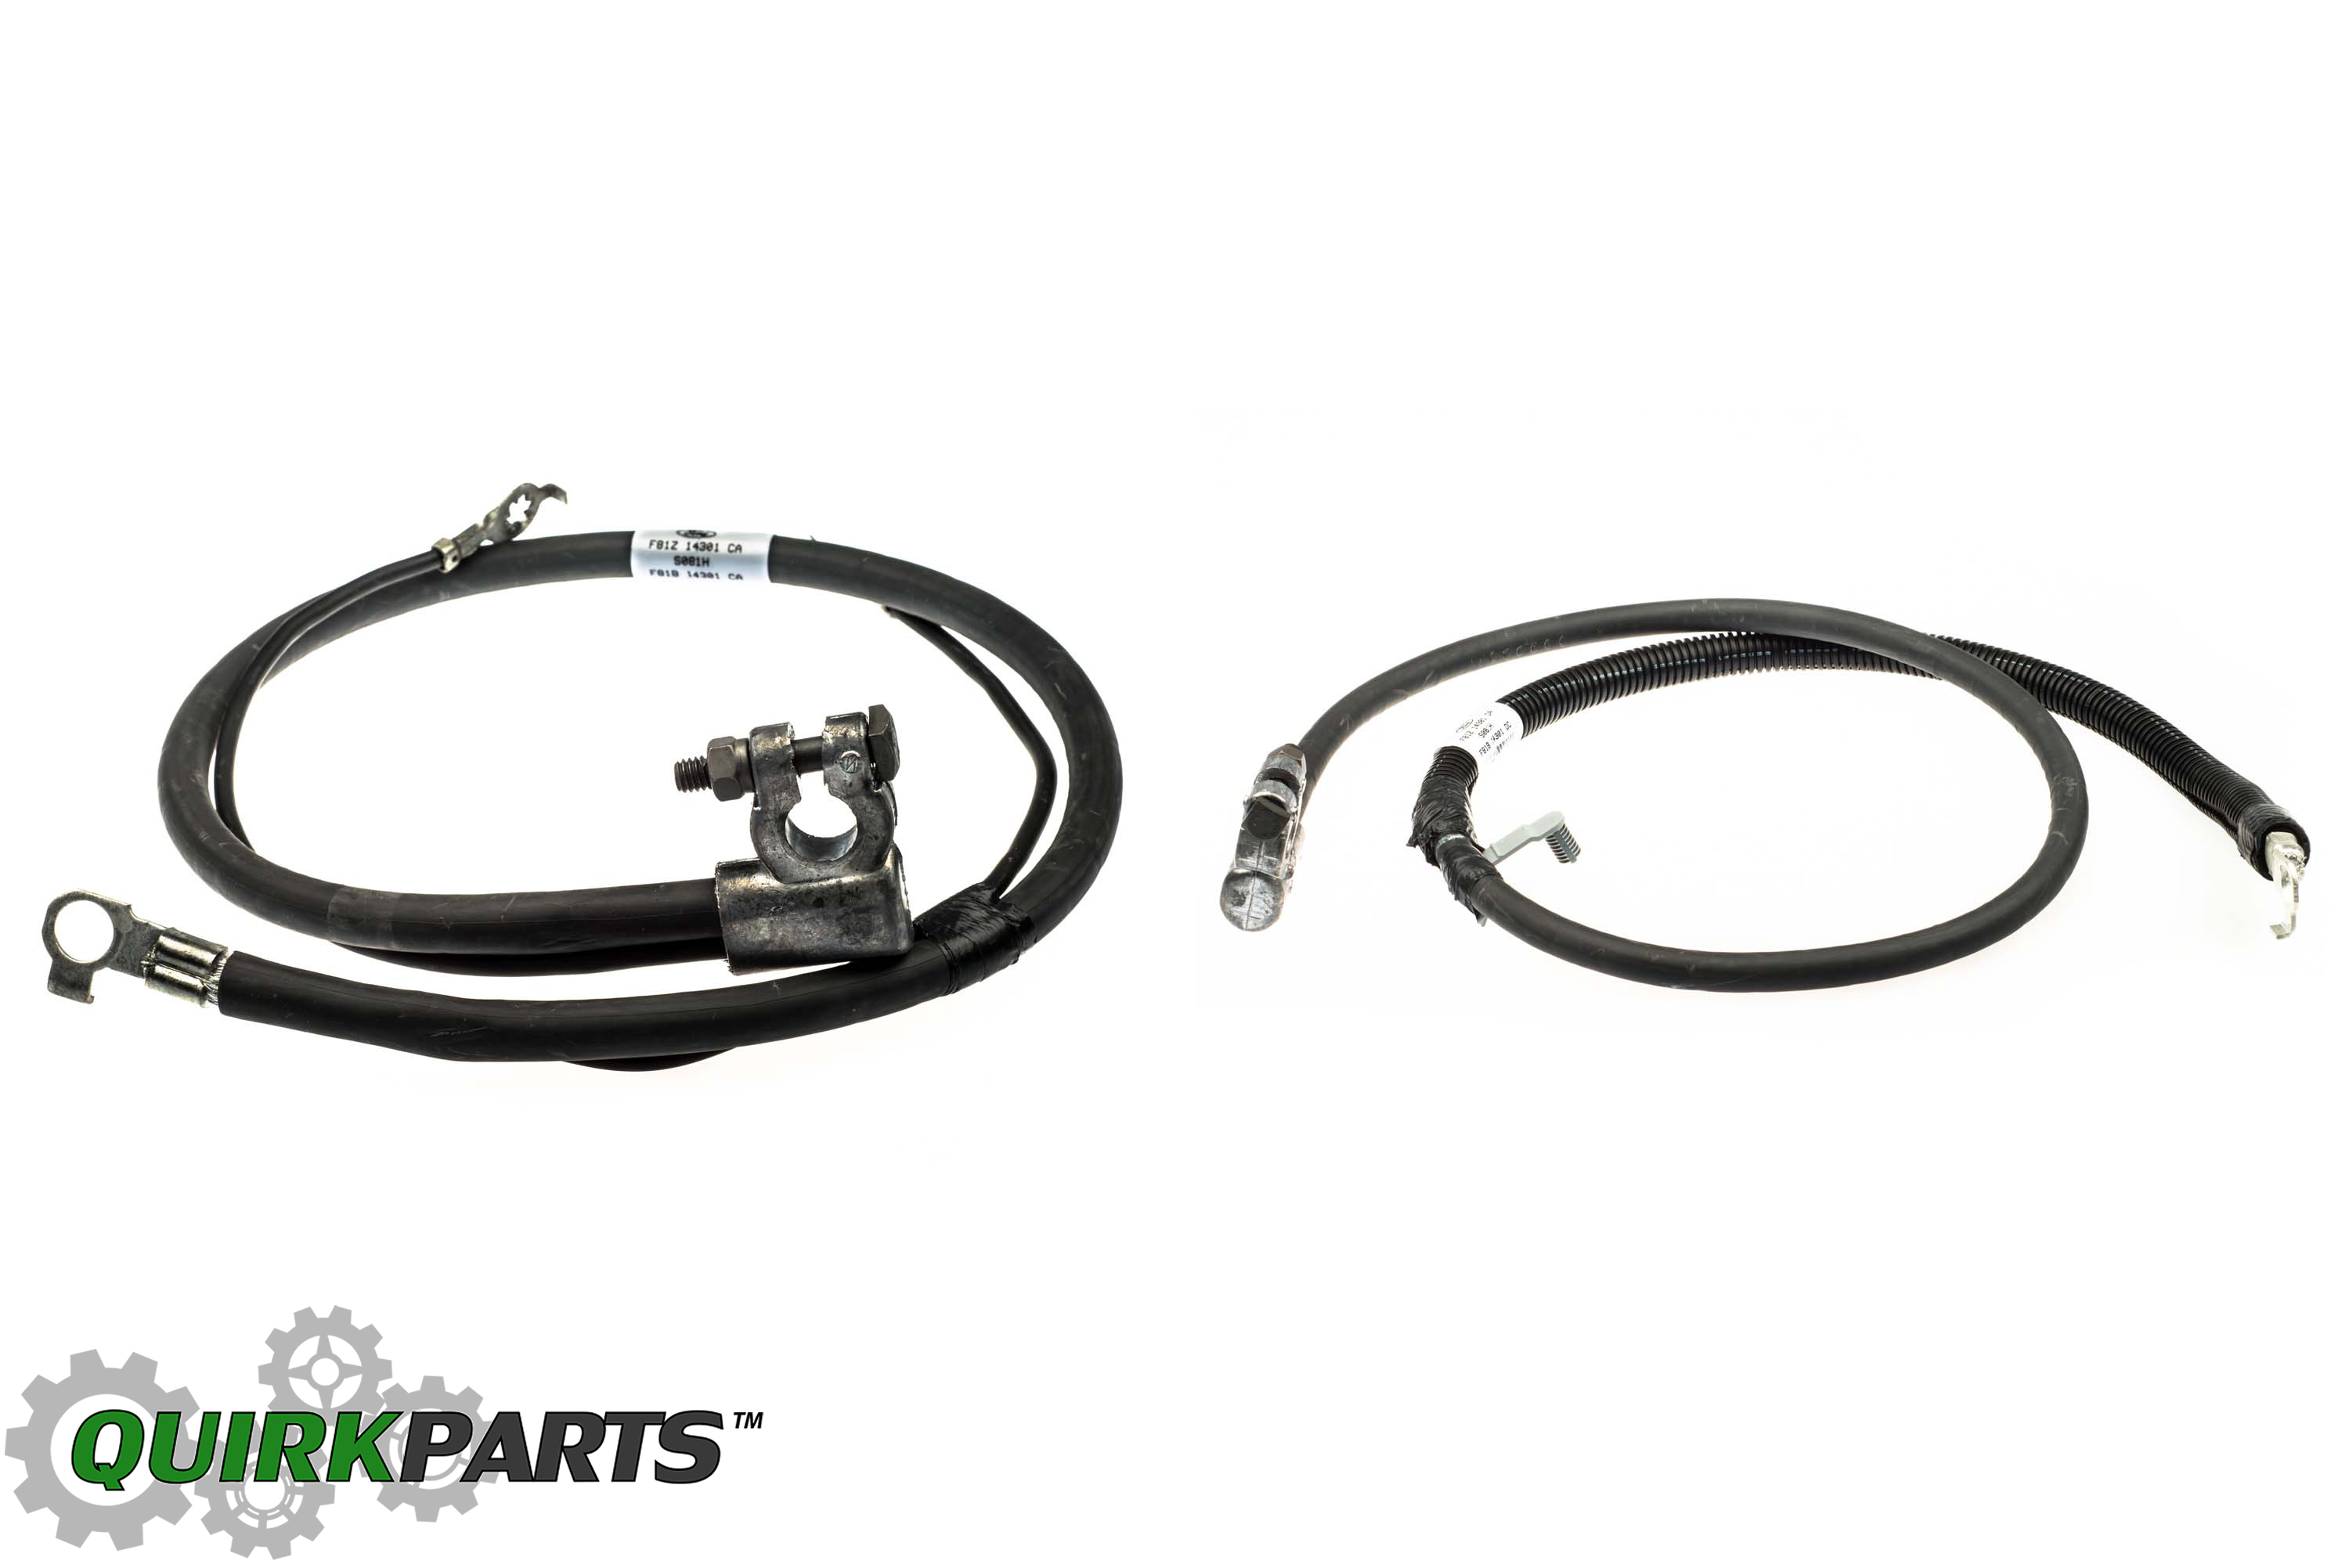 2001 Ford f350 battery cables #10